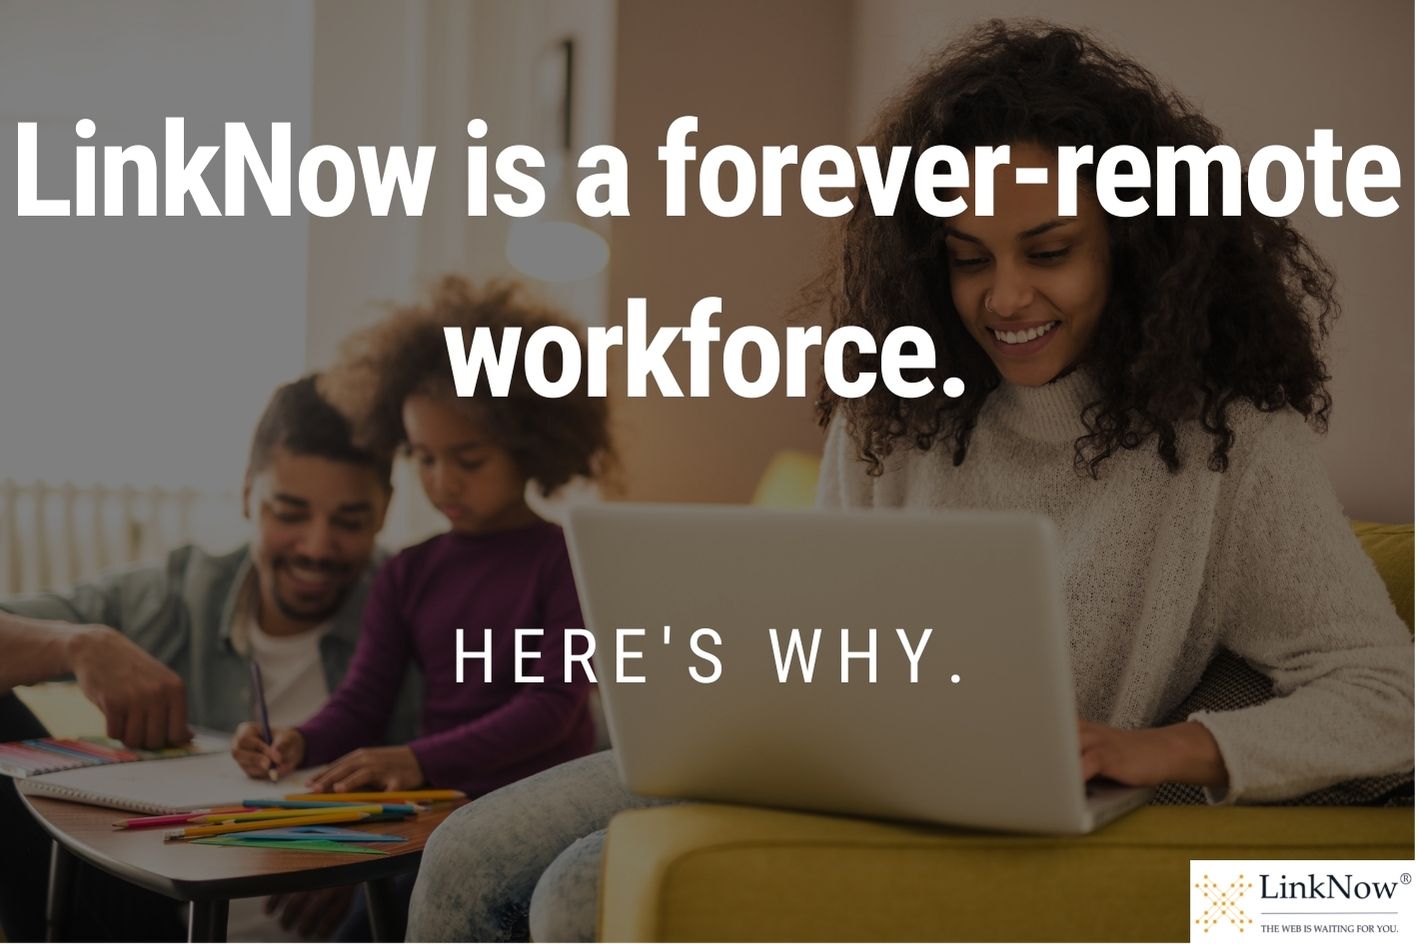 Woman working with child playing with father behind her. Foreground text: LinkNow is a forever-remote workforce. Here's why.